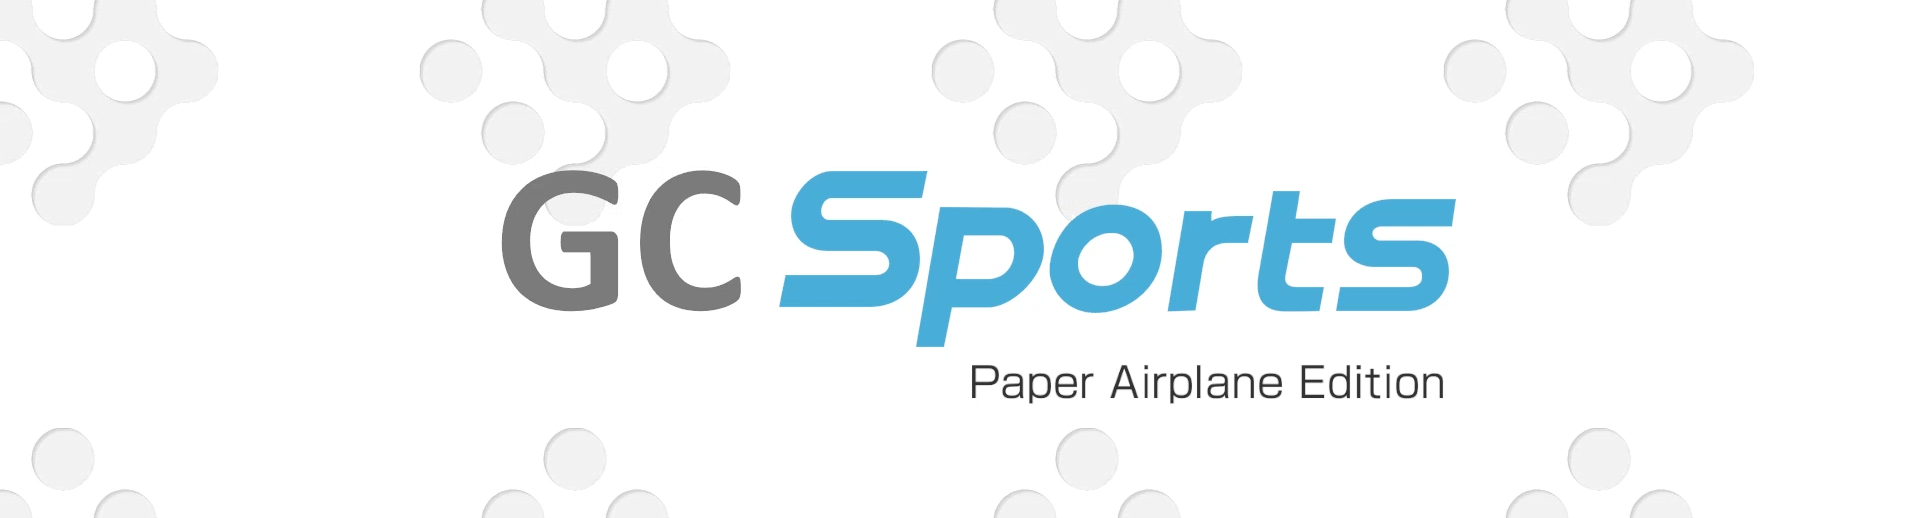 GC Sports: Paper Airplane Edition